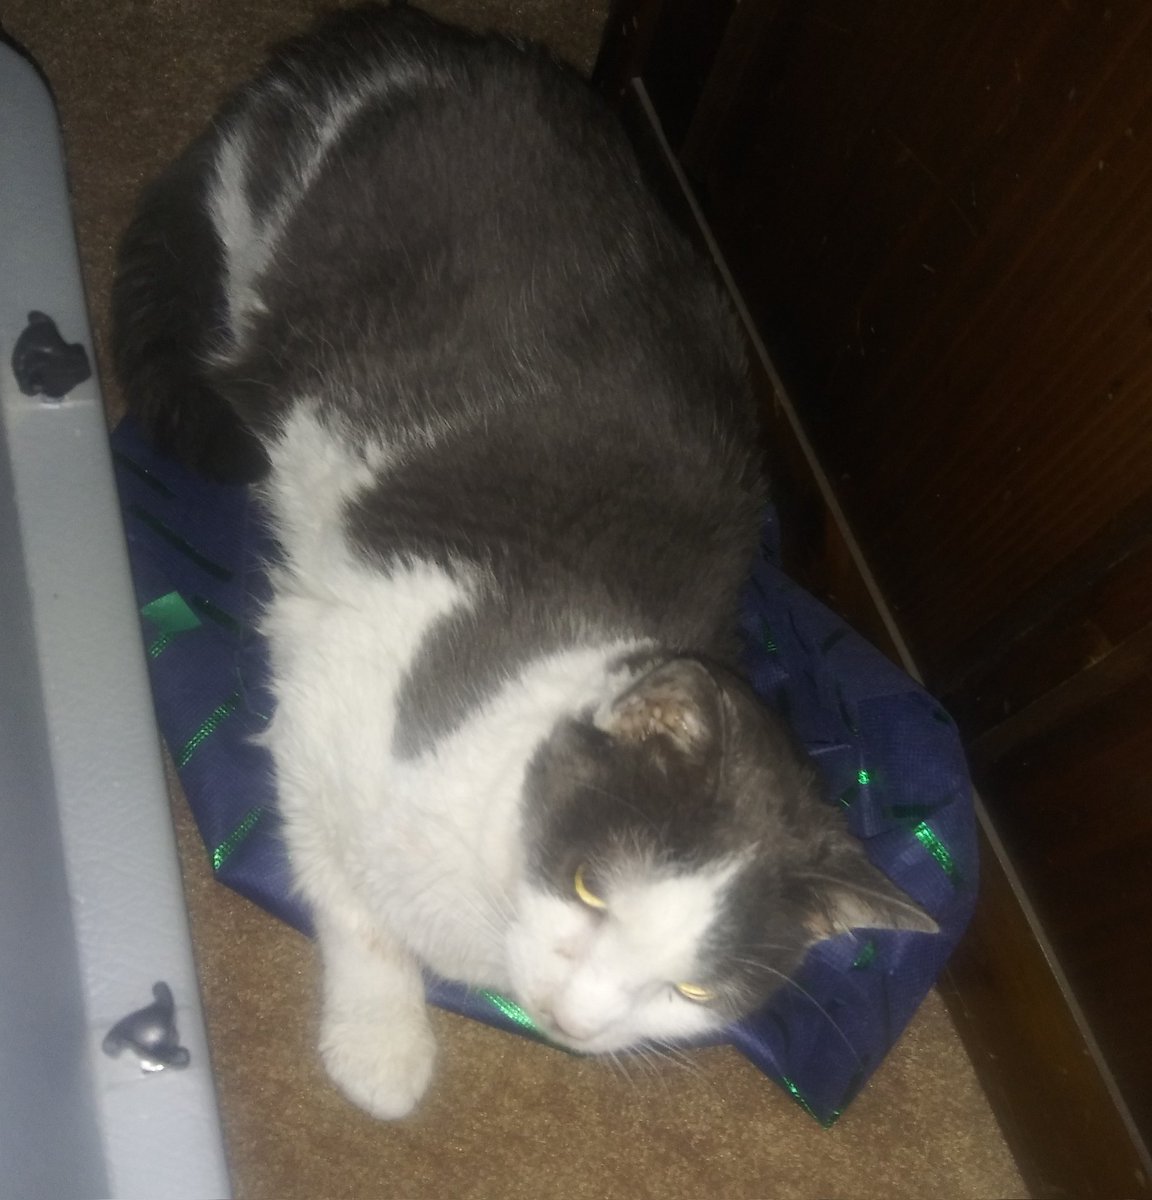 FIP treatment day 62/84

It's a concerning/ relieving news day. Orion rests on Uncle Josh's gift bag.

#cats #CatsOfTwitter  #CatsAreFamily #CatsLover #CatsOnTwitter #CatRescue  #ilovecats #SaveOrion #catnap #FIPcats #buyitdontstreamit #music #HappySong

distrokid.com/hyperfollow/se…